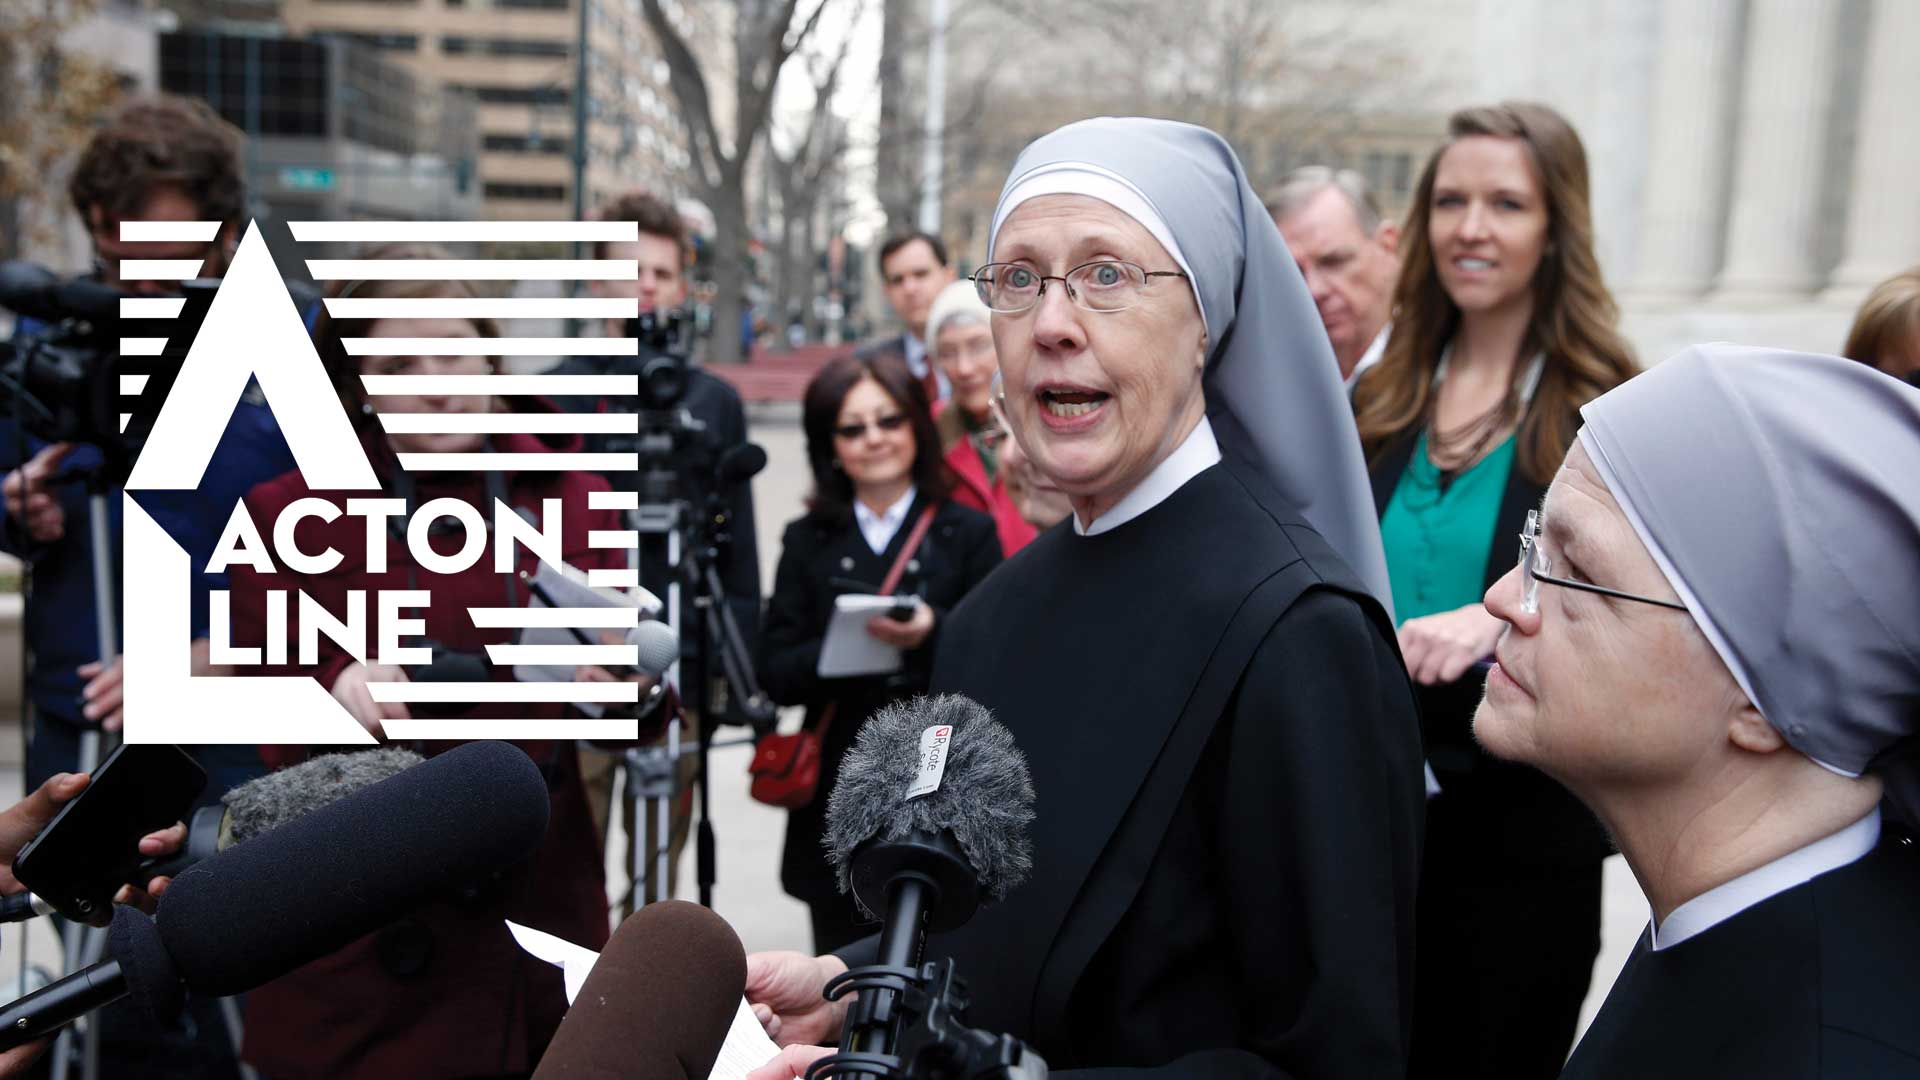 Little Sisters of the Poor give a statement to the press outside of a court building